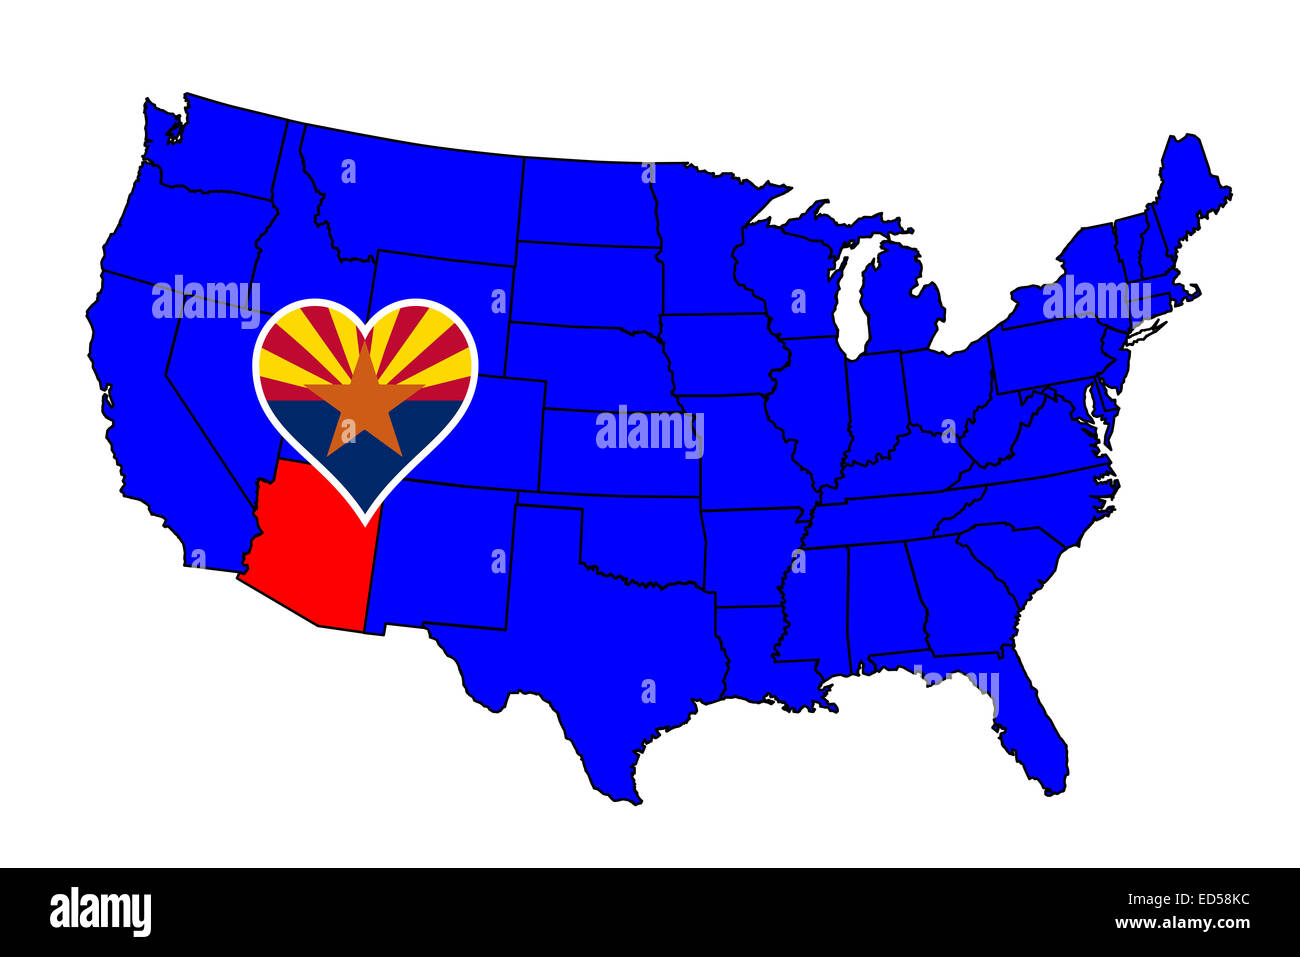 Arizona state outline and icon inset set into a map of The United States of America Stock Photo